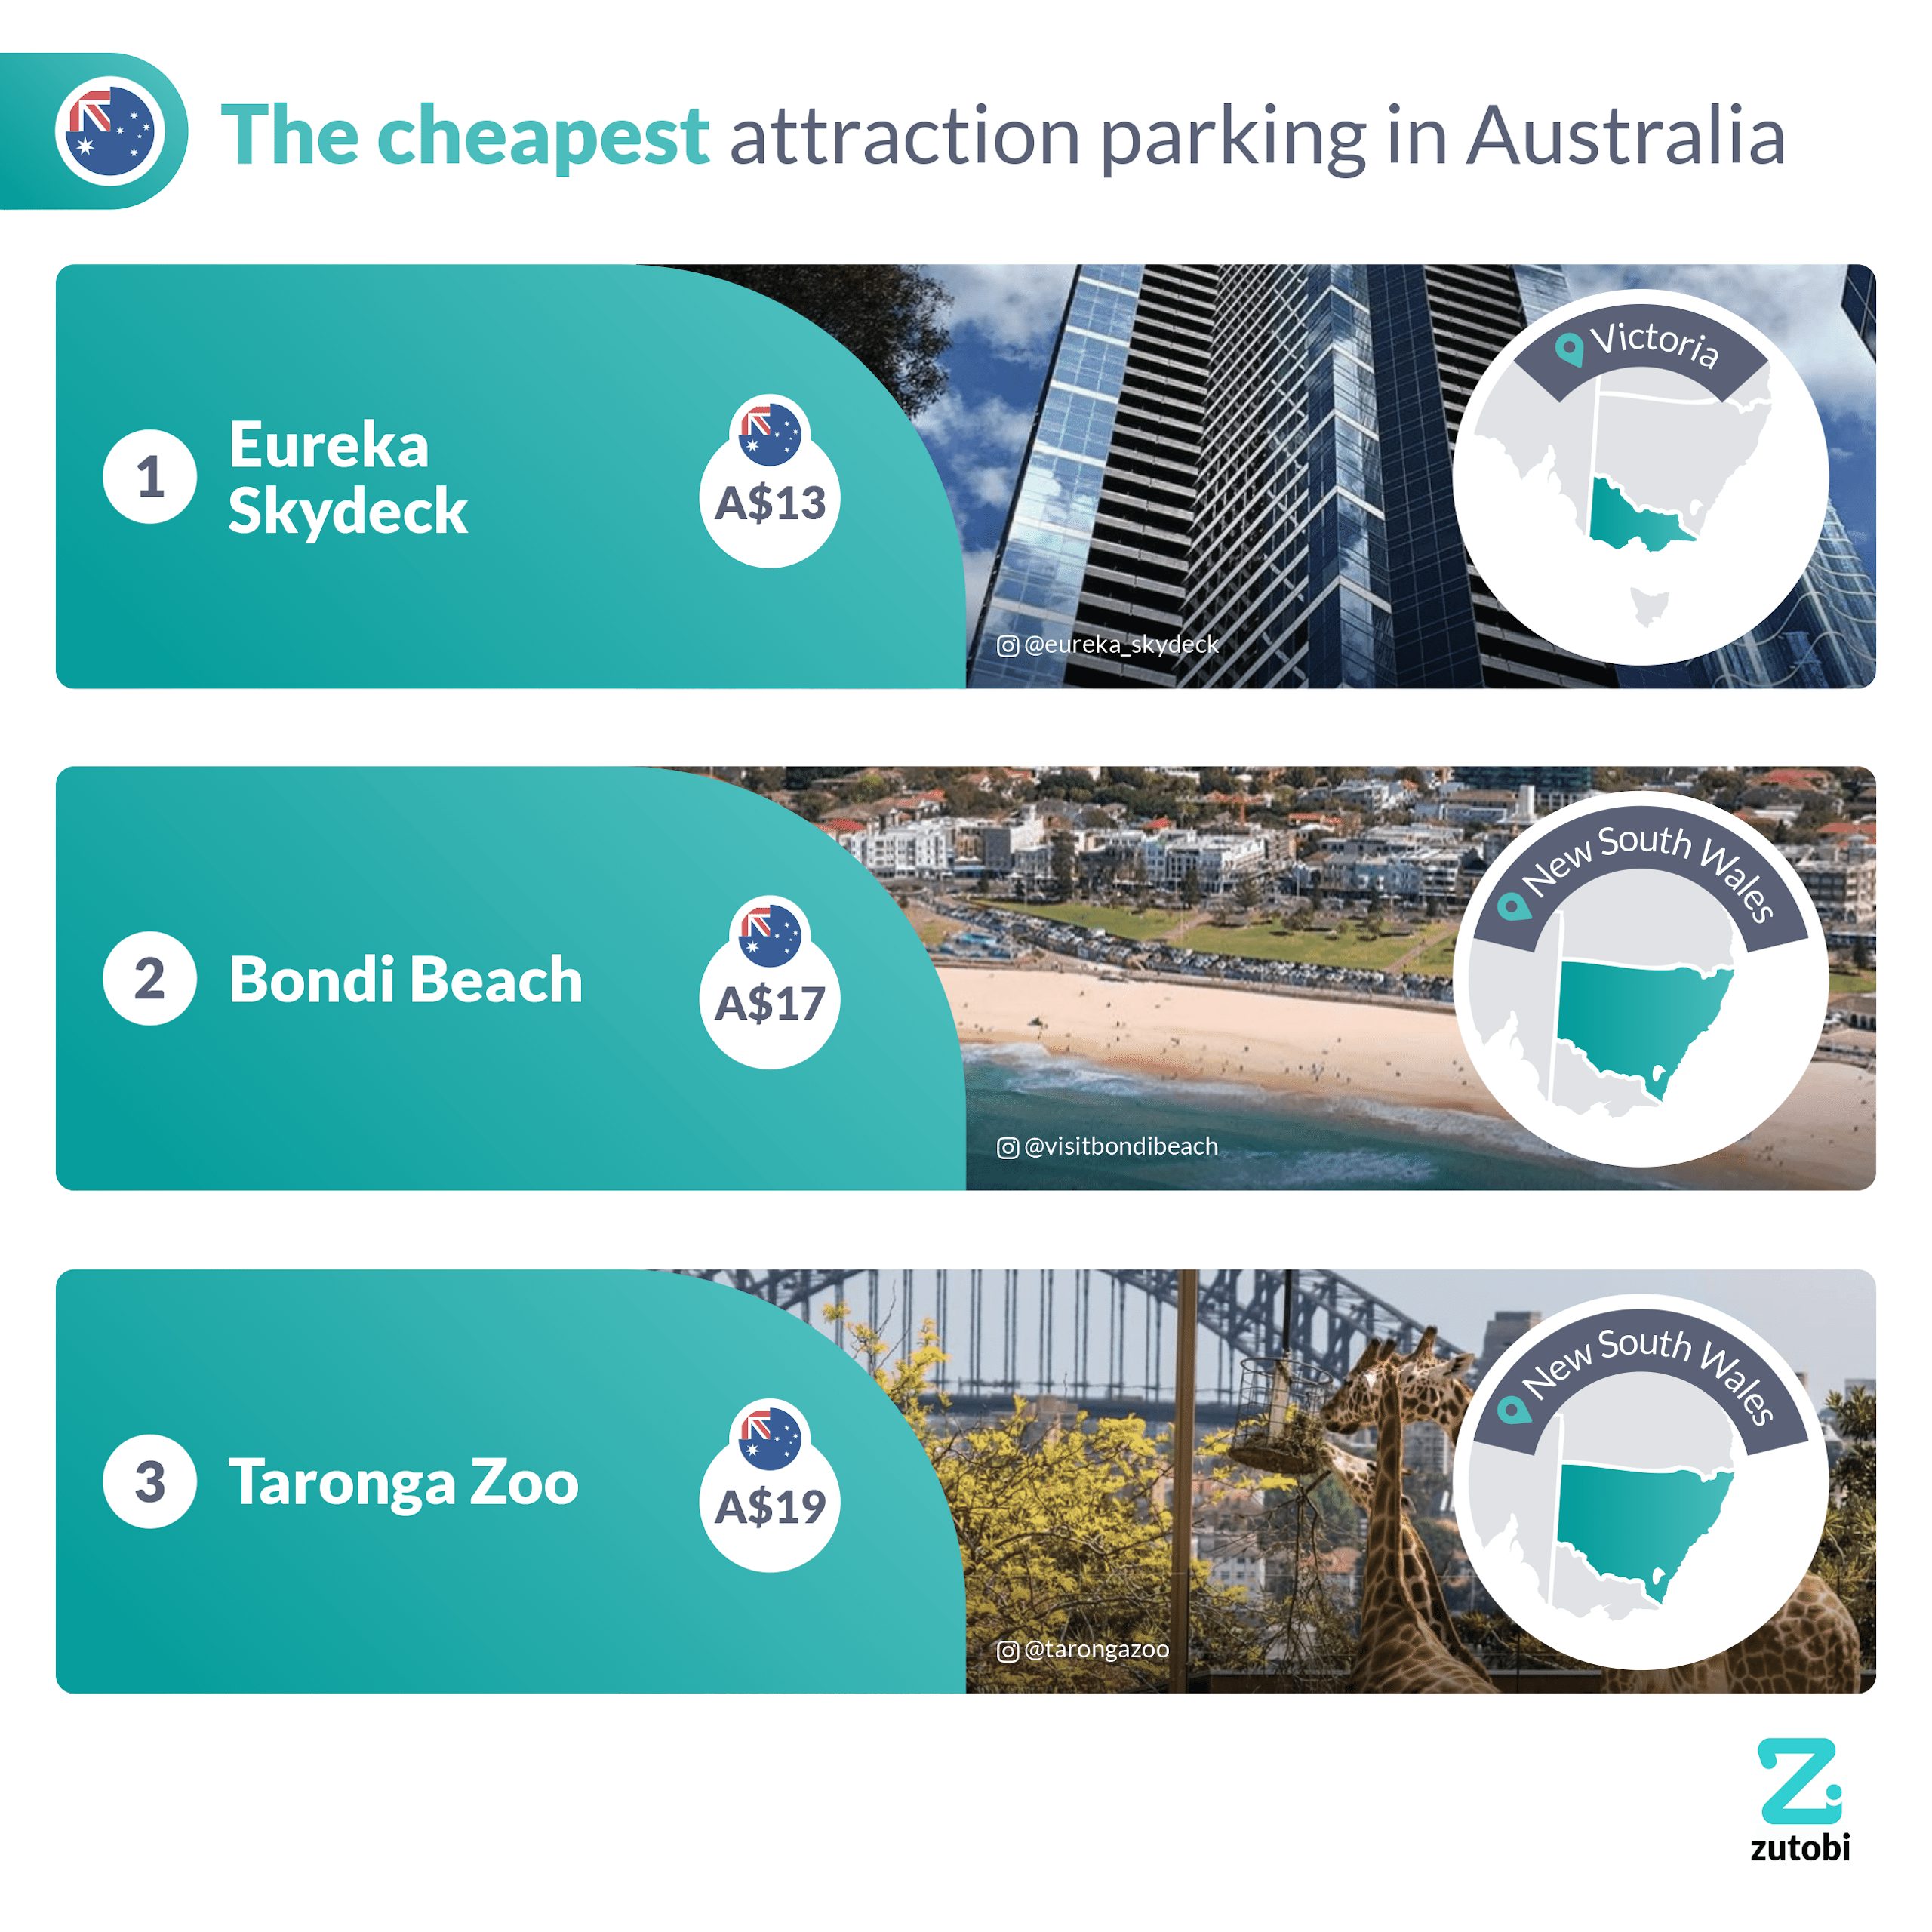 The cheapest attraction parking in Australia